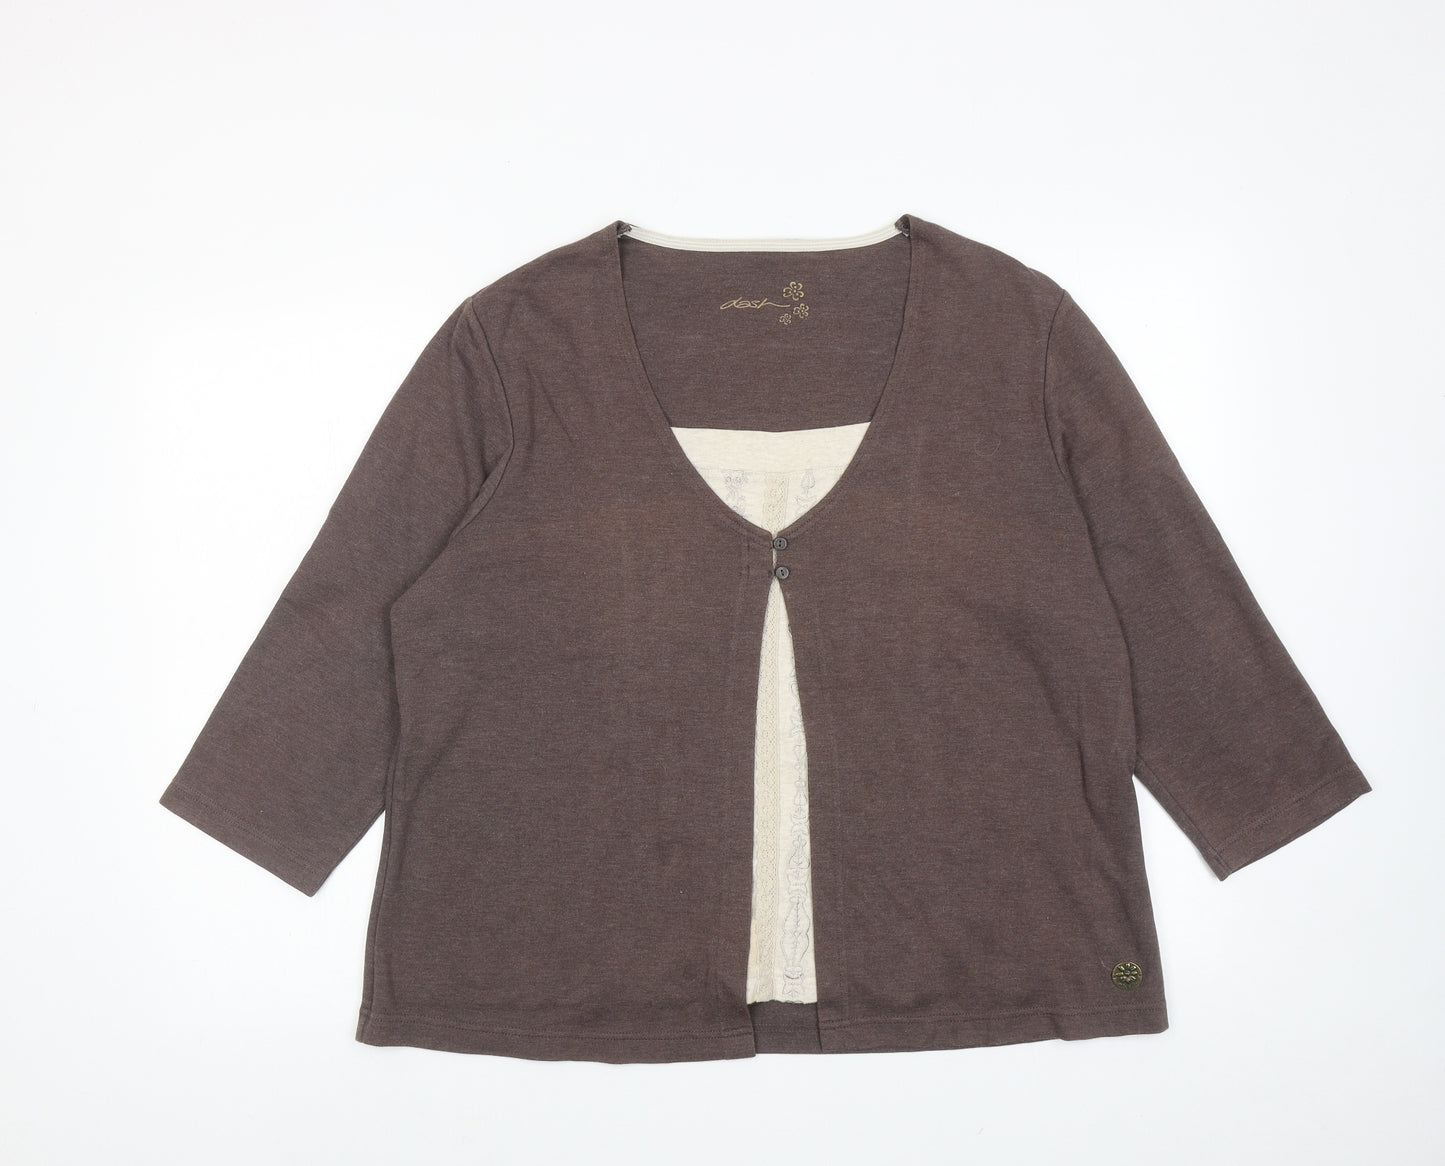 DASH Womens Brown Cotton Basic Blouse Size 12 Scoop Neck - Two in One